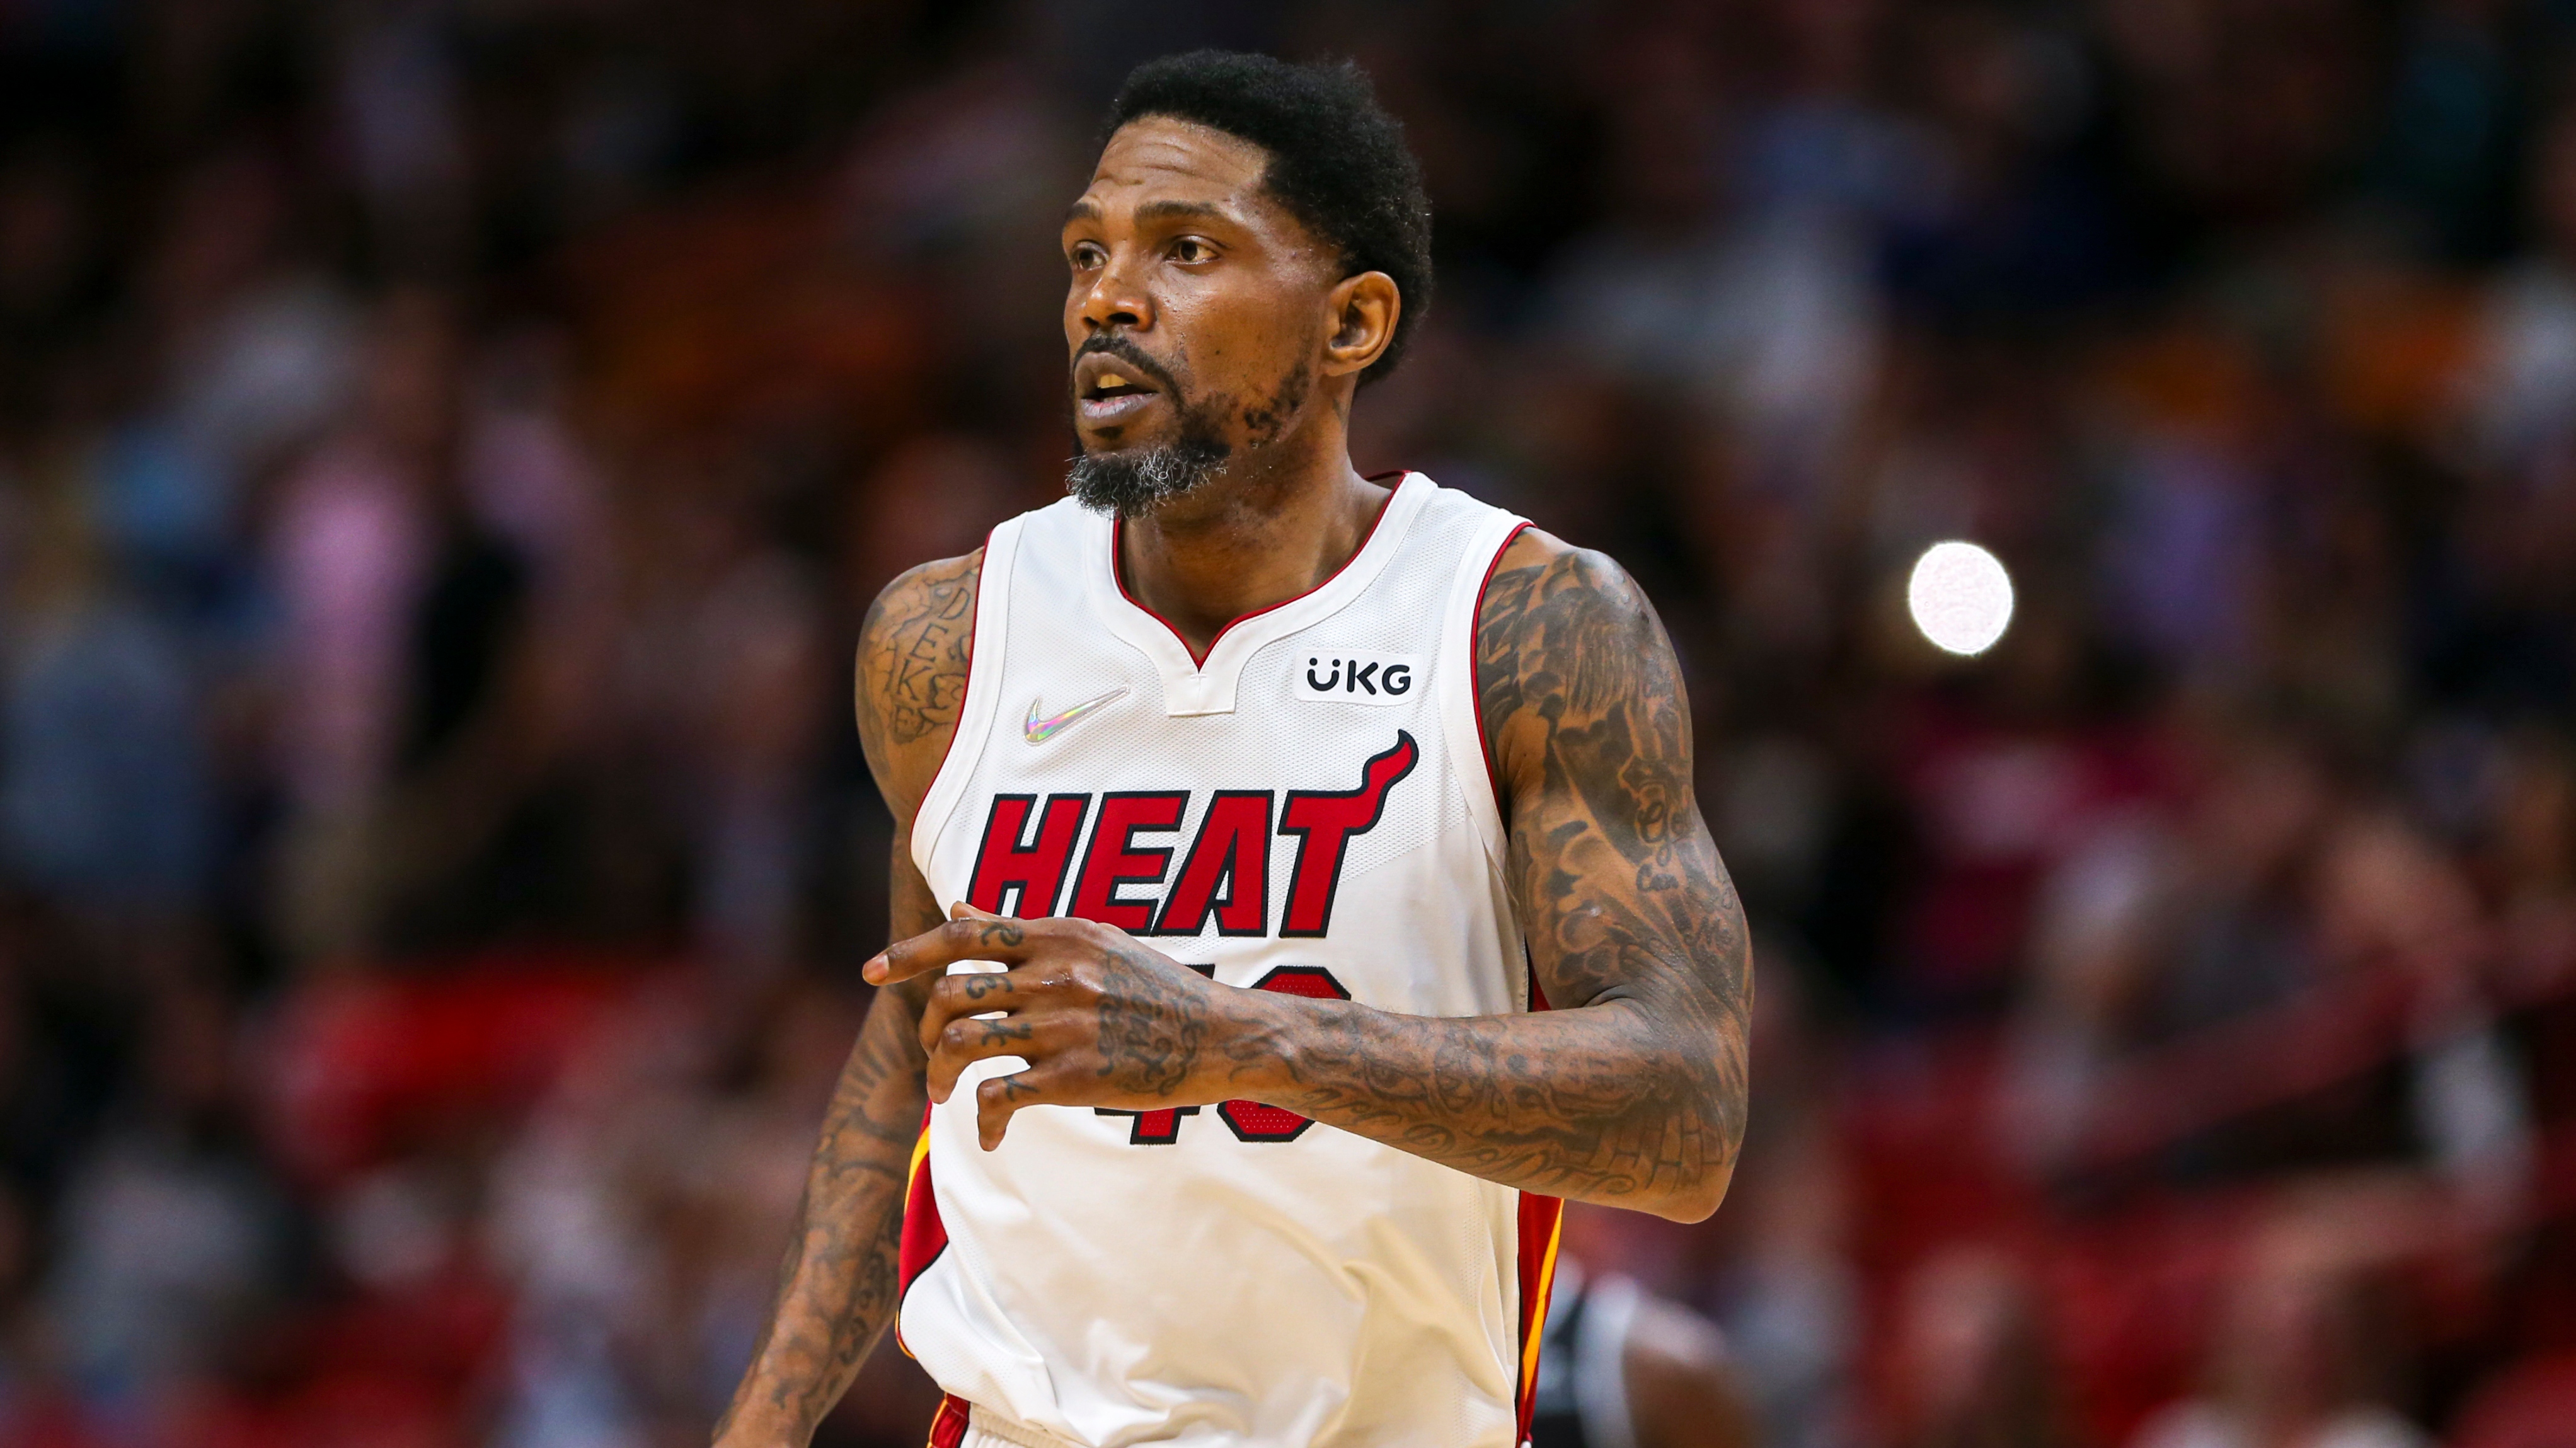 Udonis Haslem Announces Retirement After 20 Years In NBA - RealGM